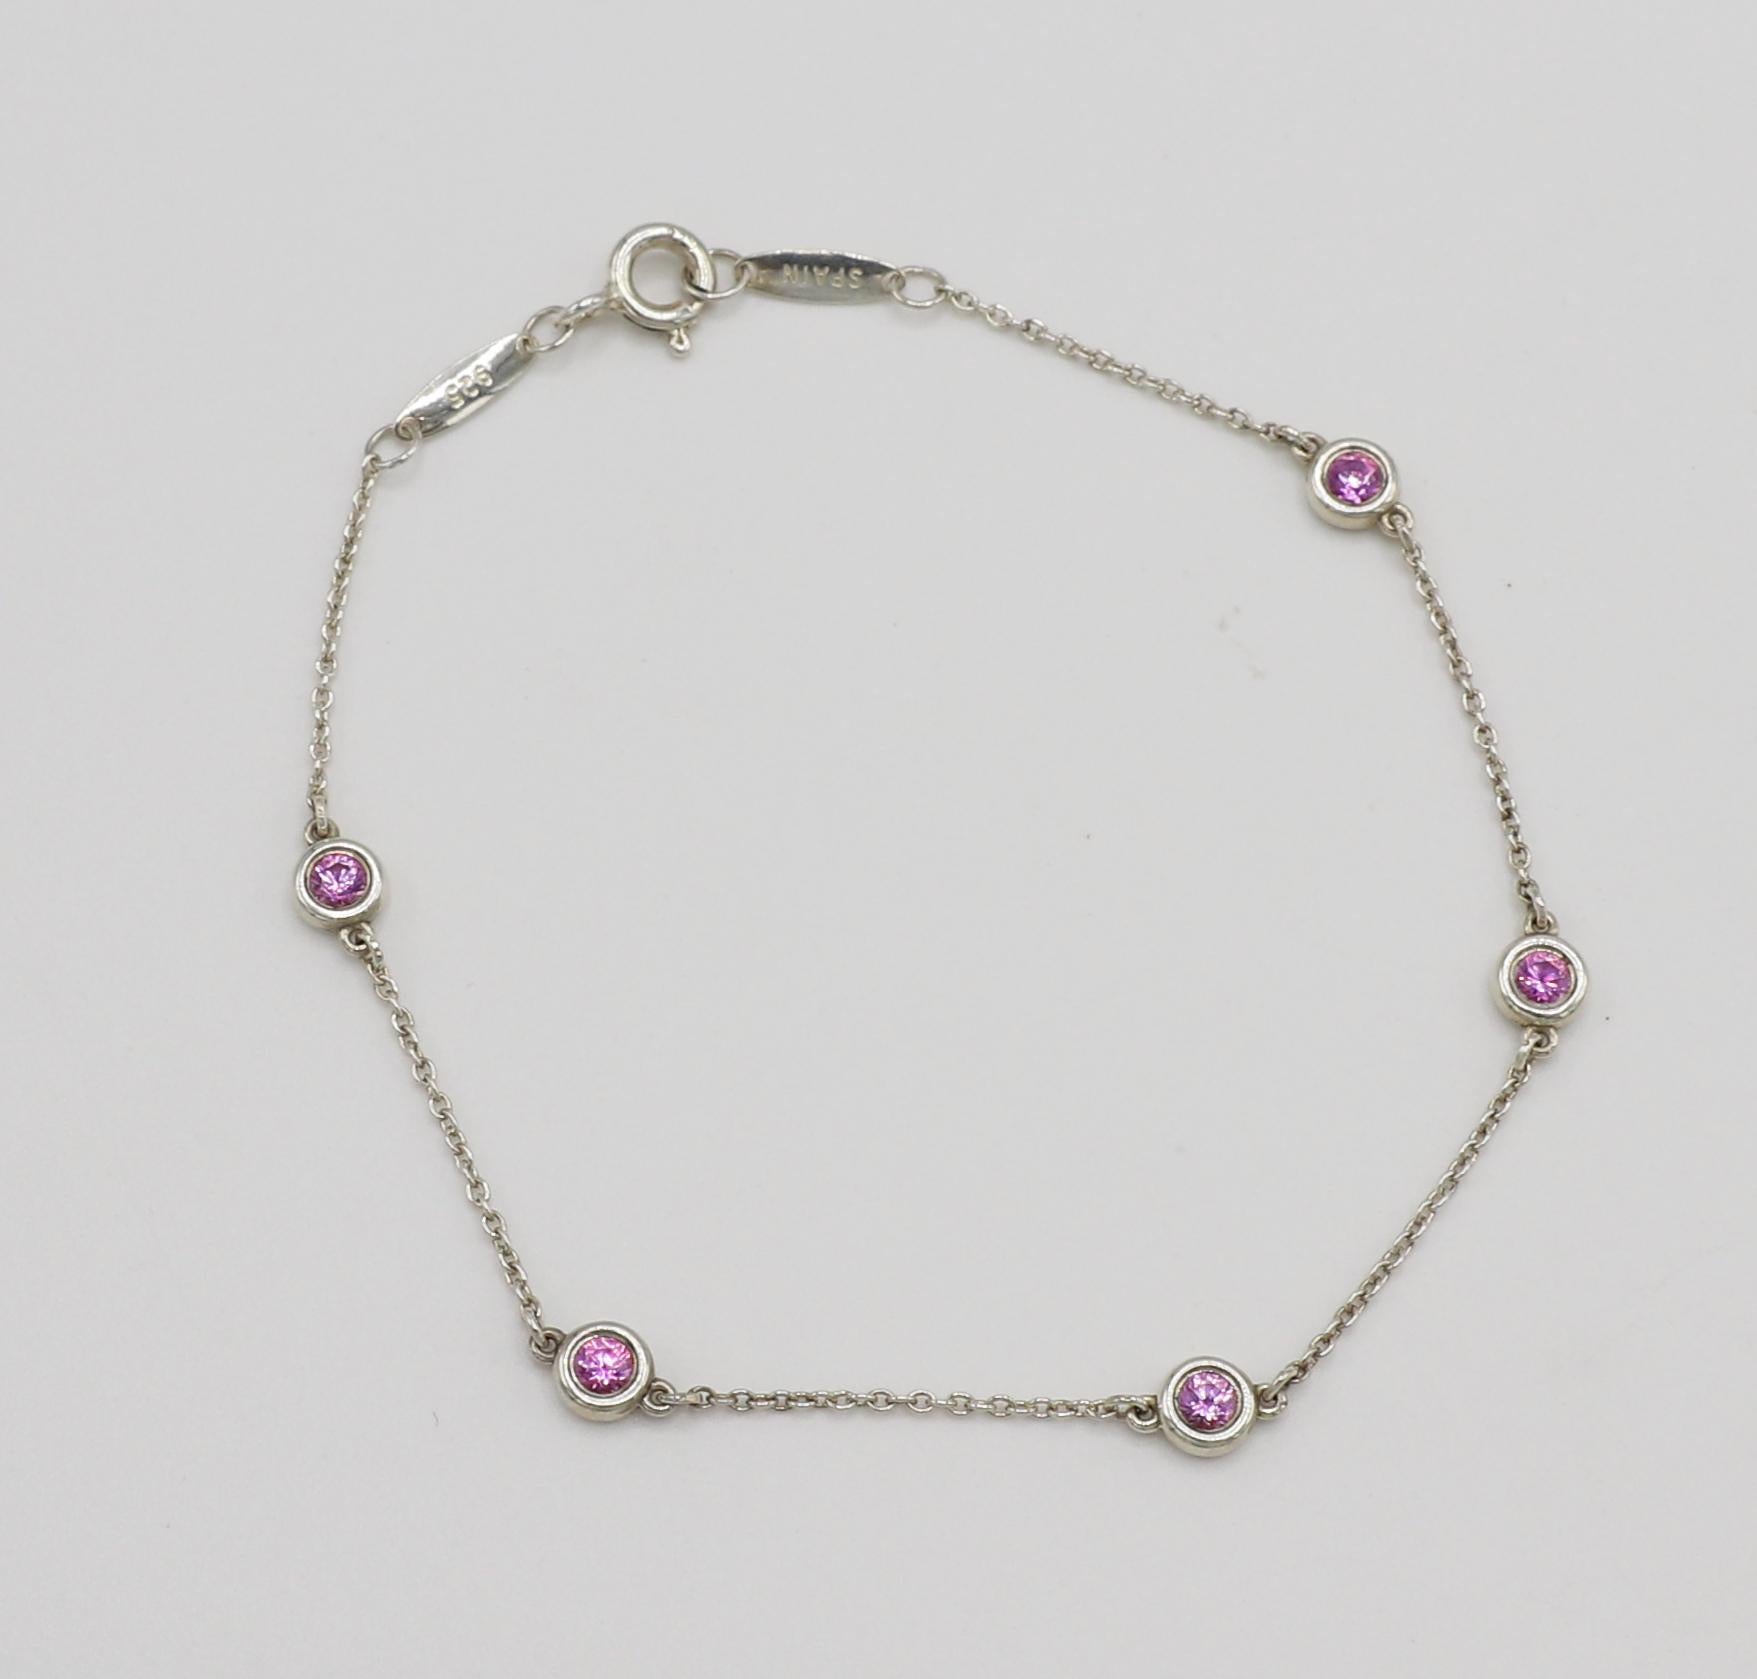 Tiffany & Co. Elsa Peretti Color By The Yard Sterling Silver 5 Sapphire Bracelet
Metal: Sterling silver, 925
Weight: 1.78 grams
Length: 7 inches
Sapphires: 5 round pink sapphires, approx. 0.55 CTW 
